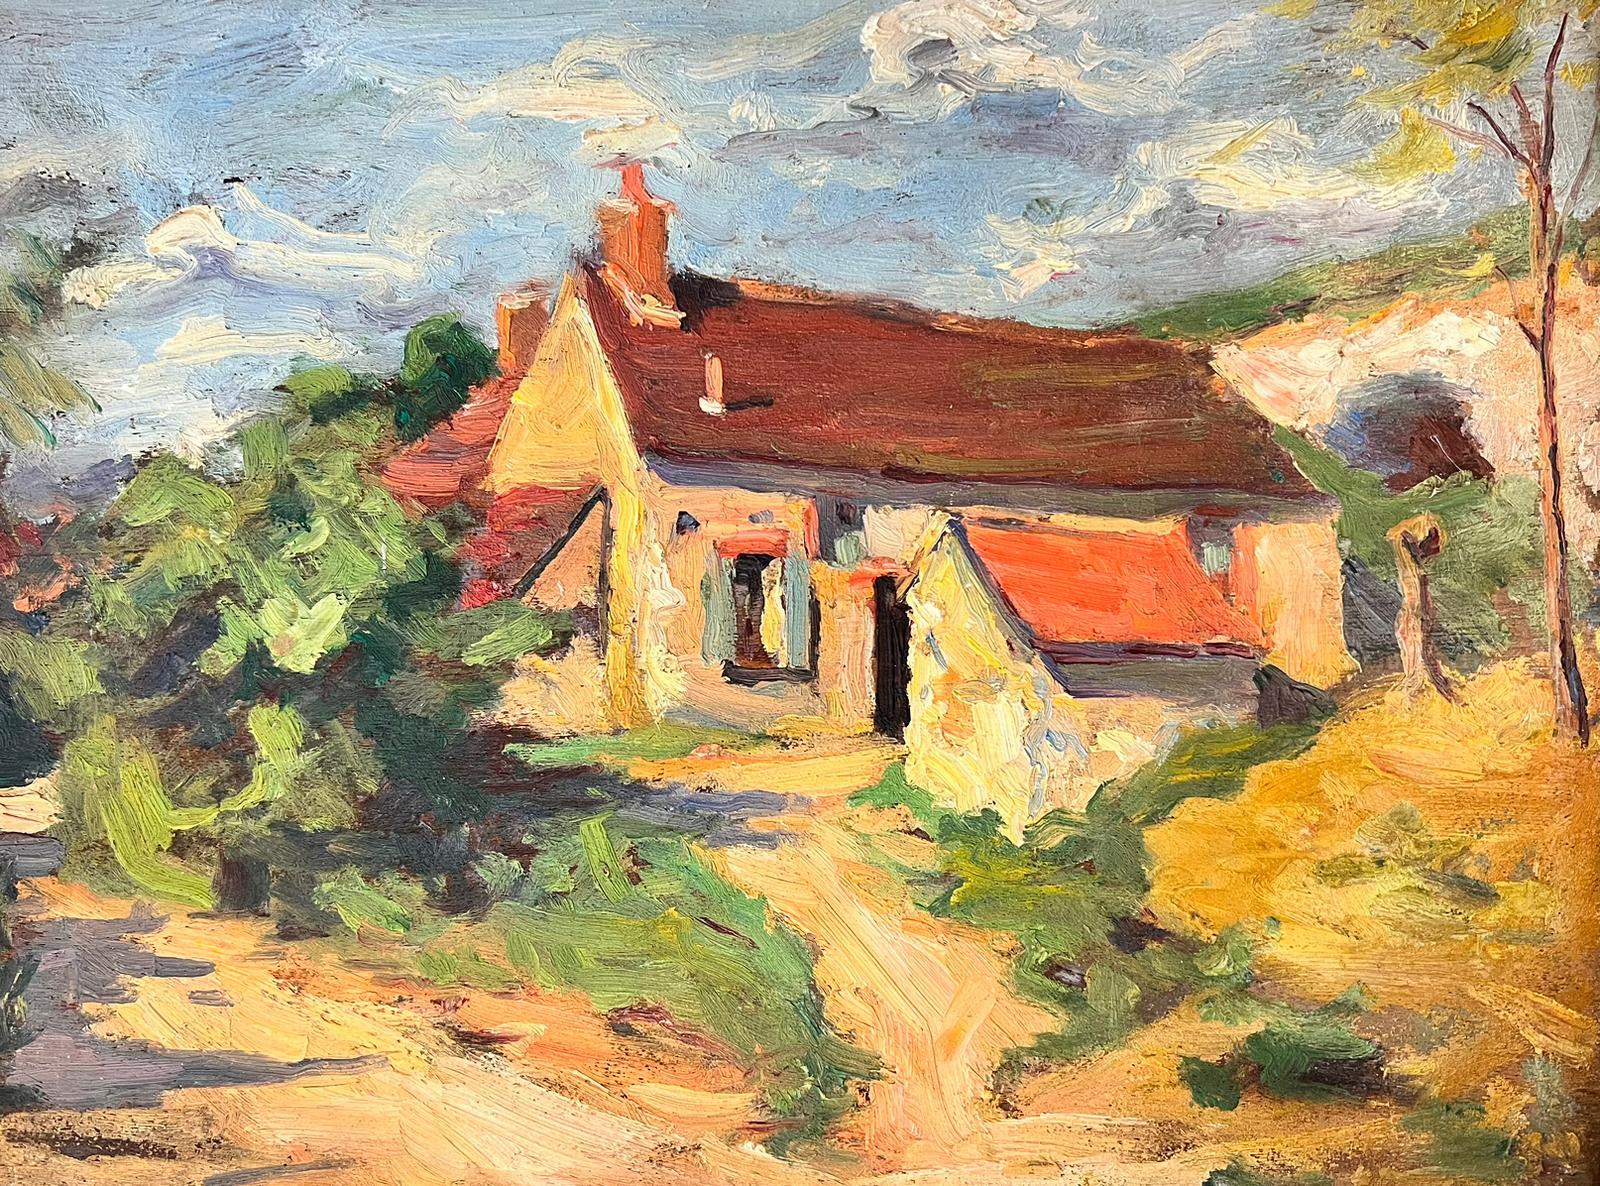 Suzanne Crochet Landscape Painting - 1930's French Post Impressionist Oil Painting - Red Roof Rustic French Cottage